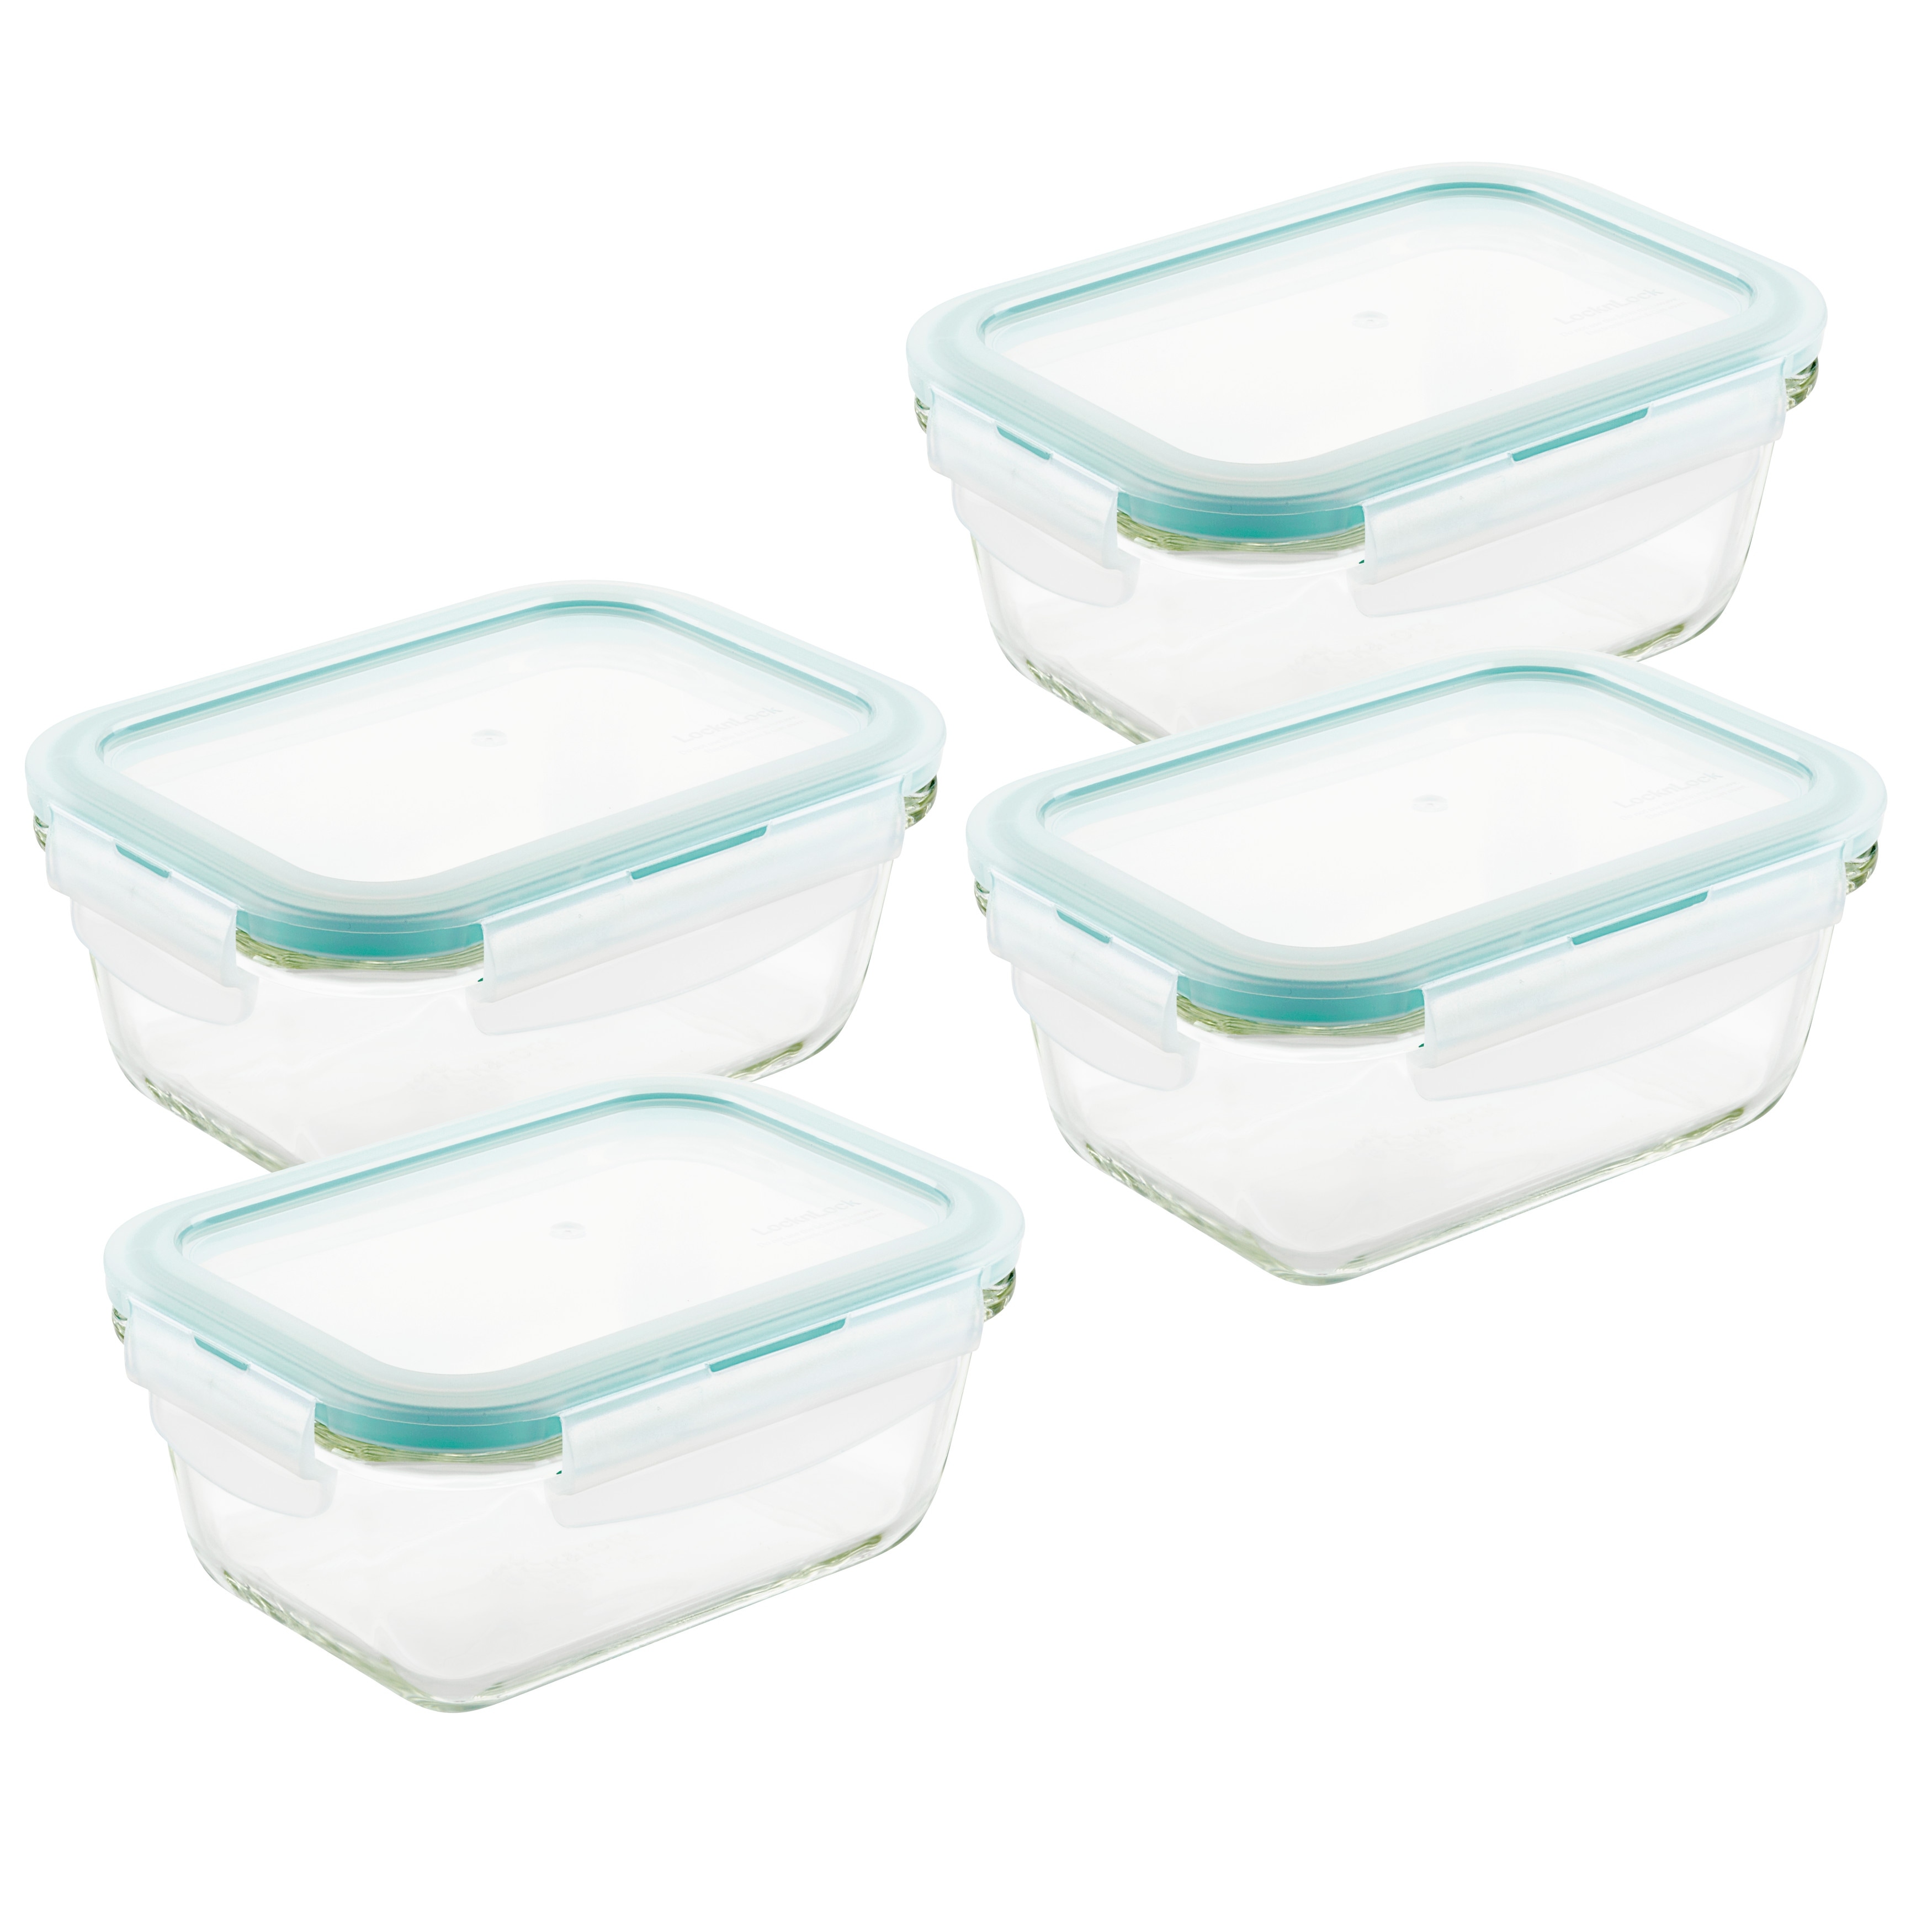 https://ak1.ostkcdn.com/images/products/is/images/direct/5d0bf2464ebd45e3f623ee5e9237d6d981a31522/LocknLock-Purely-Better-Glass-Rectangular-Food-Storage-Containers%2C-14-Ounce%2C-Set-of-Four.jpg